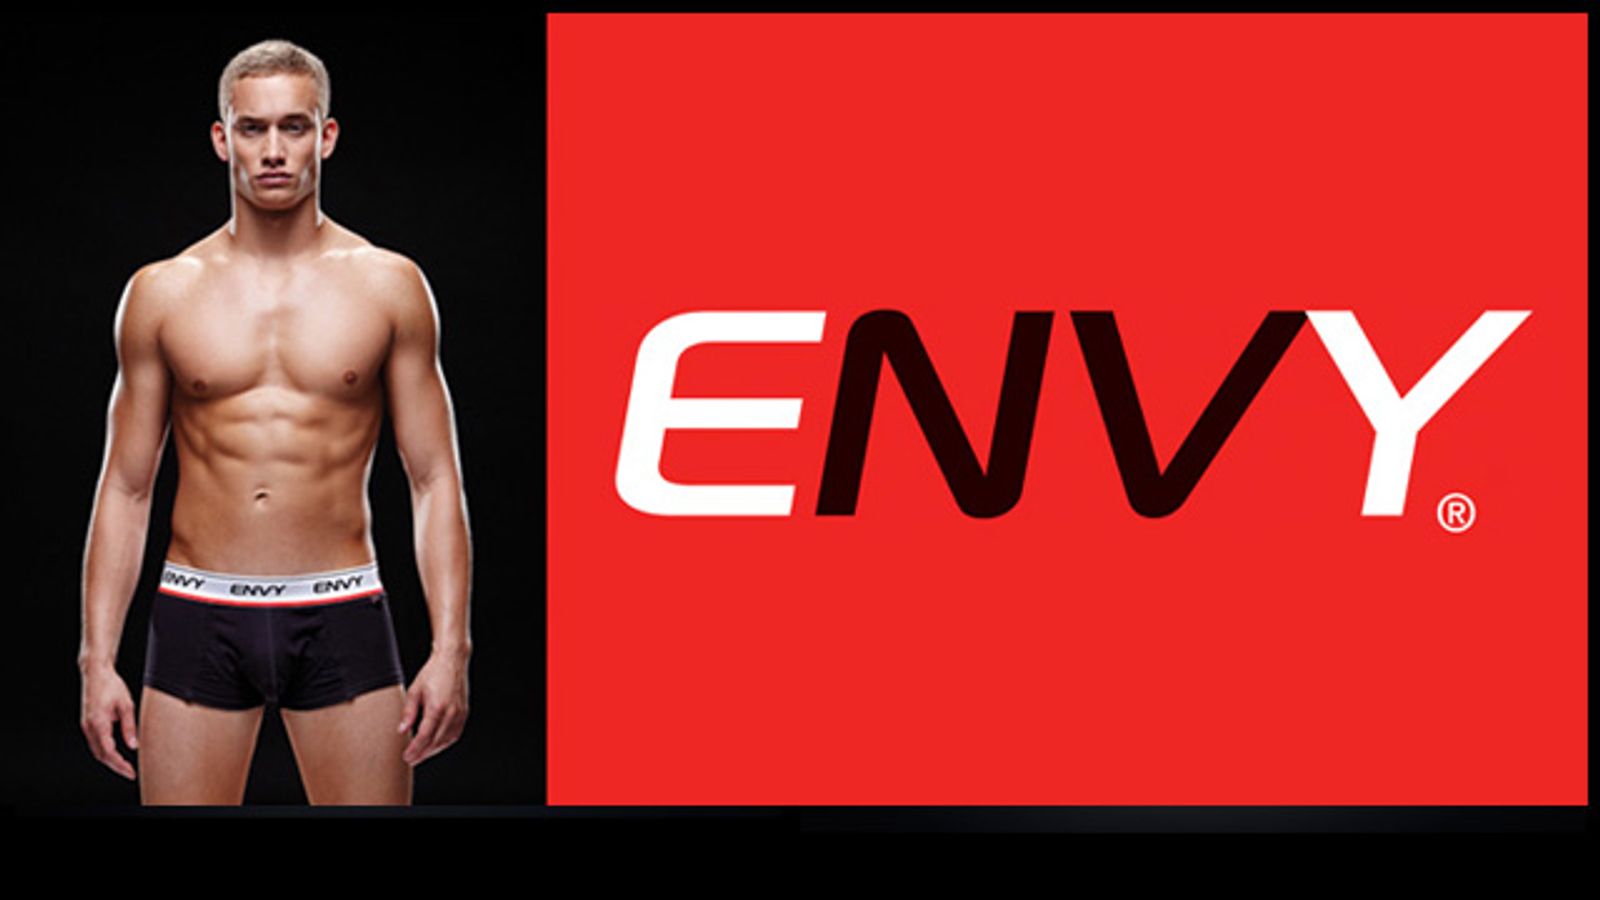 Baci Lingerie’s Envy Men's Line Now Available to Pre-Order